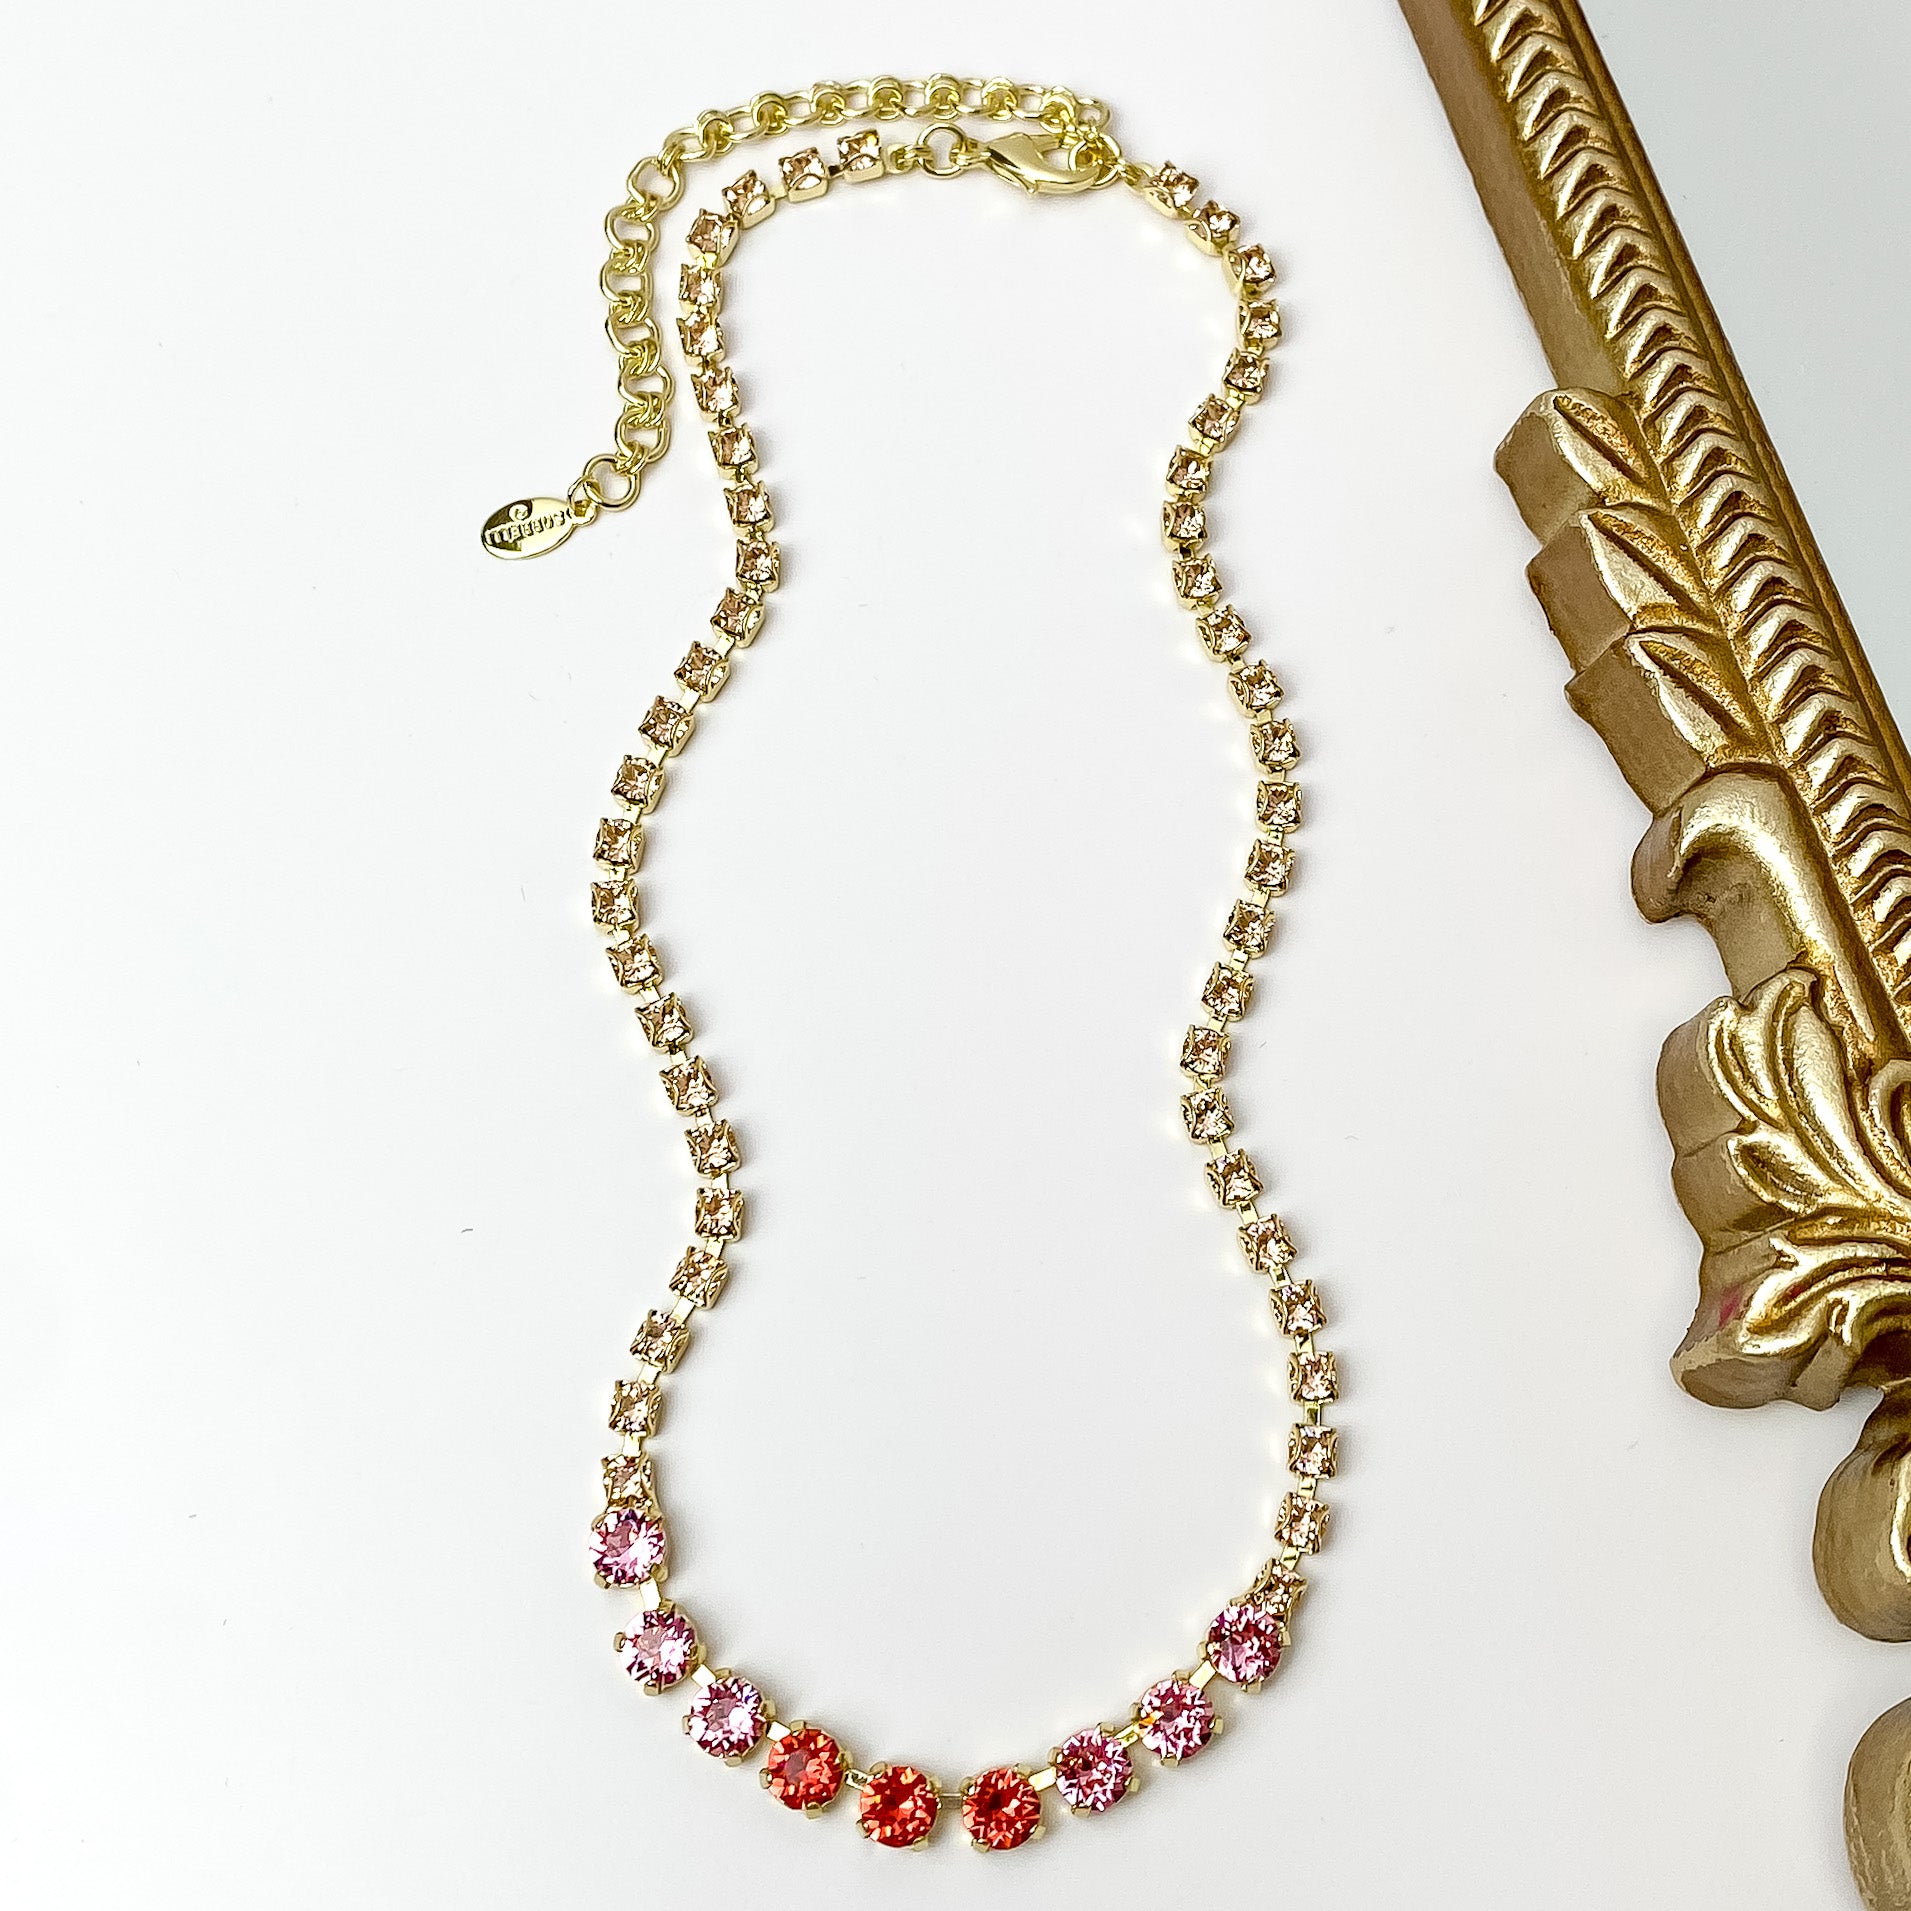 Pictured is a gold necklace with a mix of pink crystals. This necklace is pictured on a white background with a gold mirror on the right side.